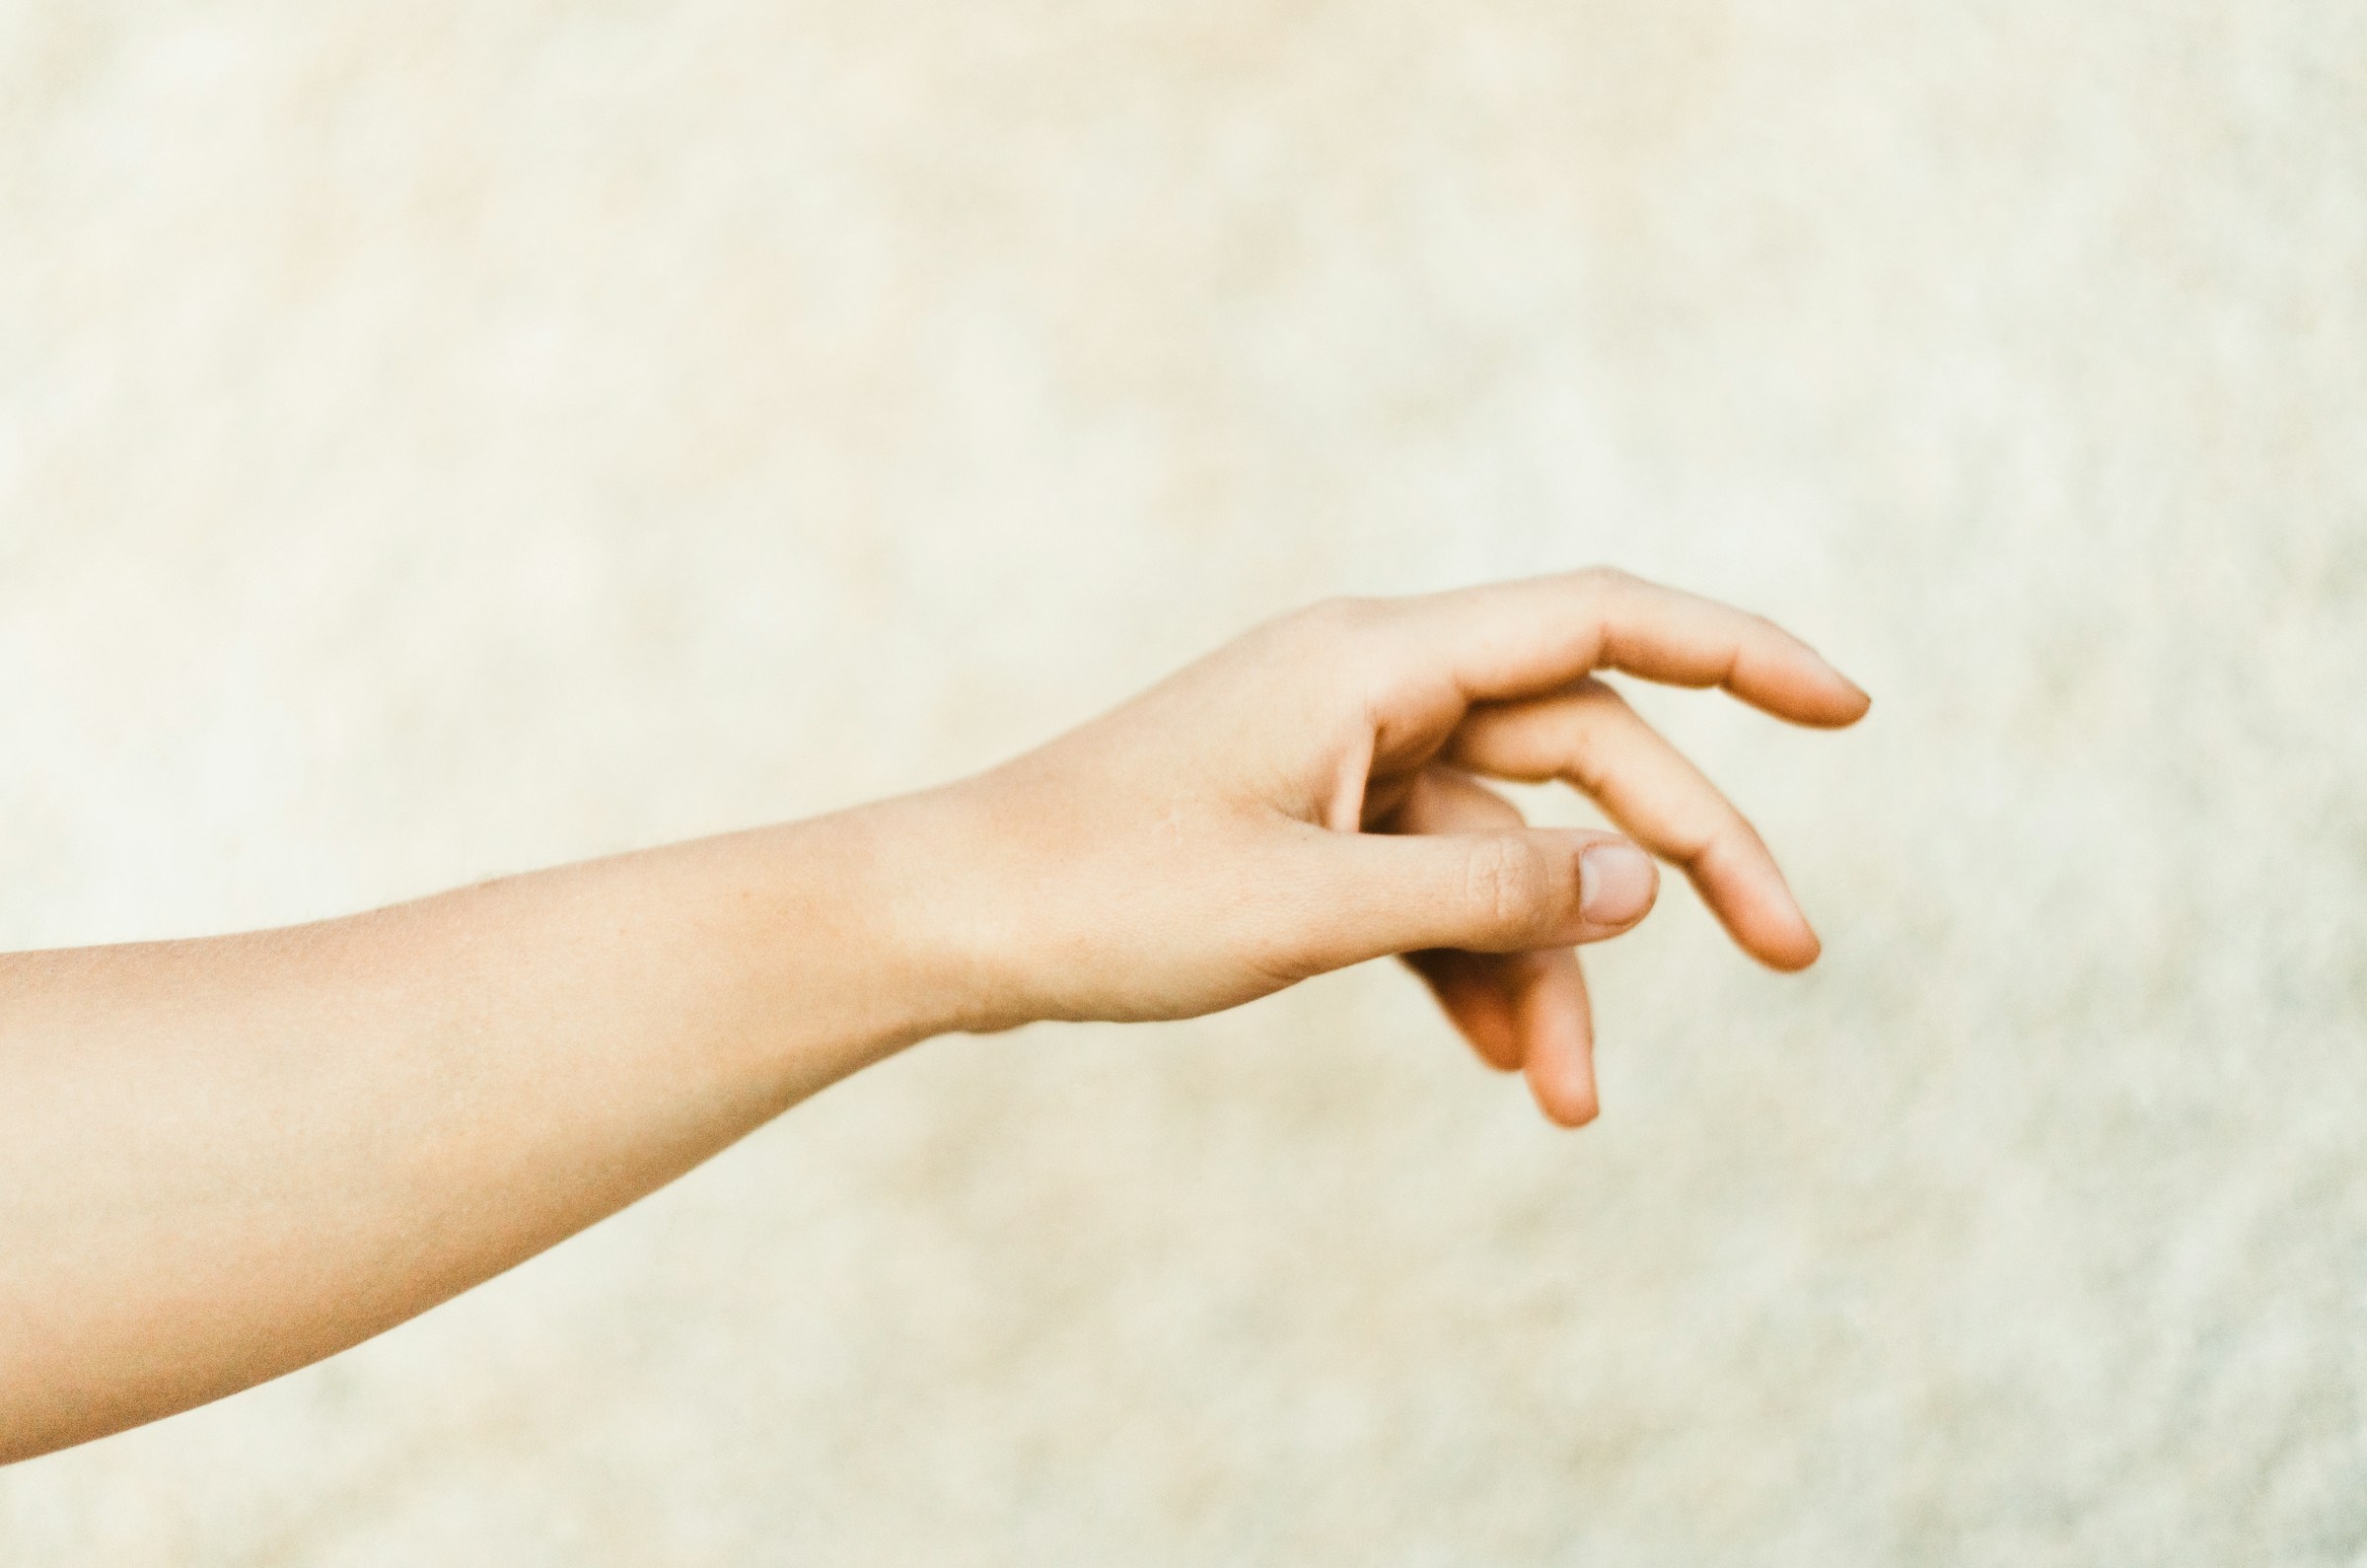 A person holding out their hand | Source: Unsplash